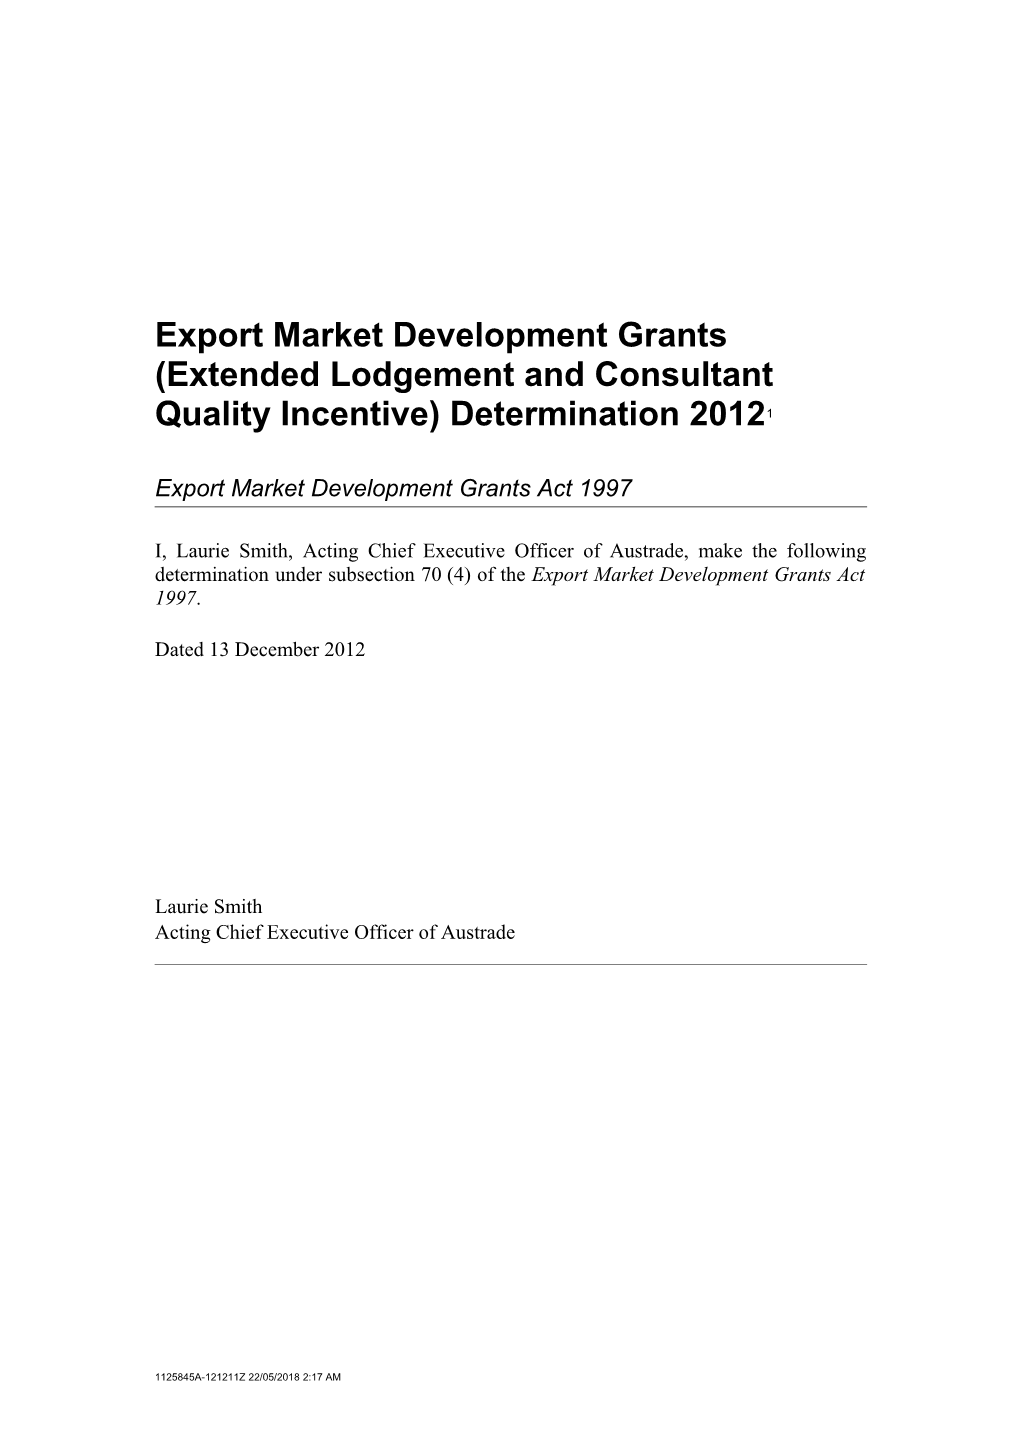 Export Market Development Grants (Extended Lodgement and Consultant Quality Incentive)